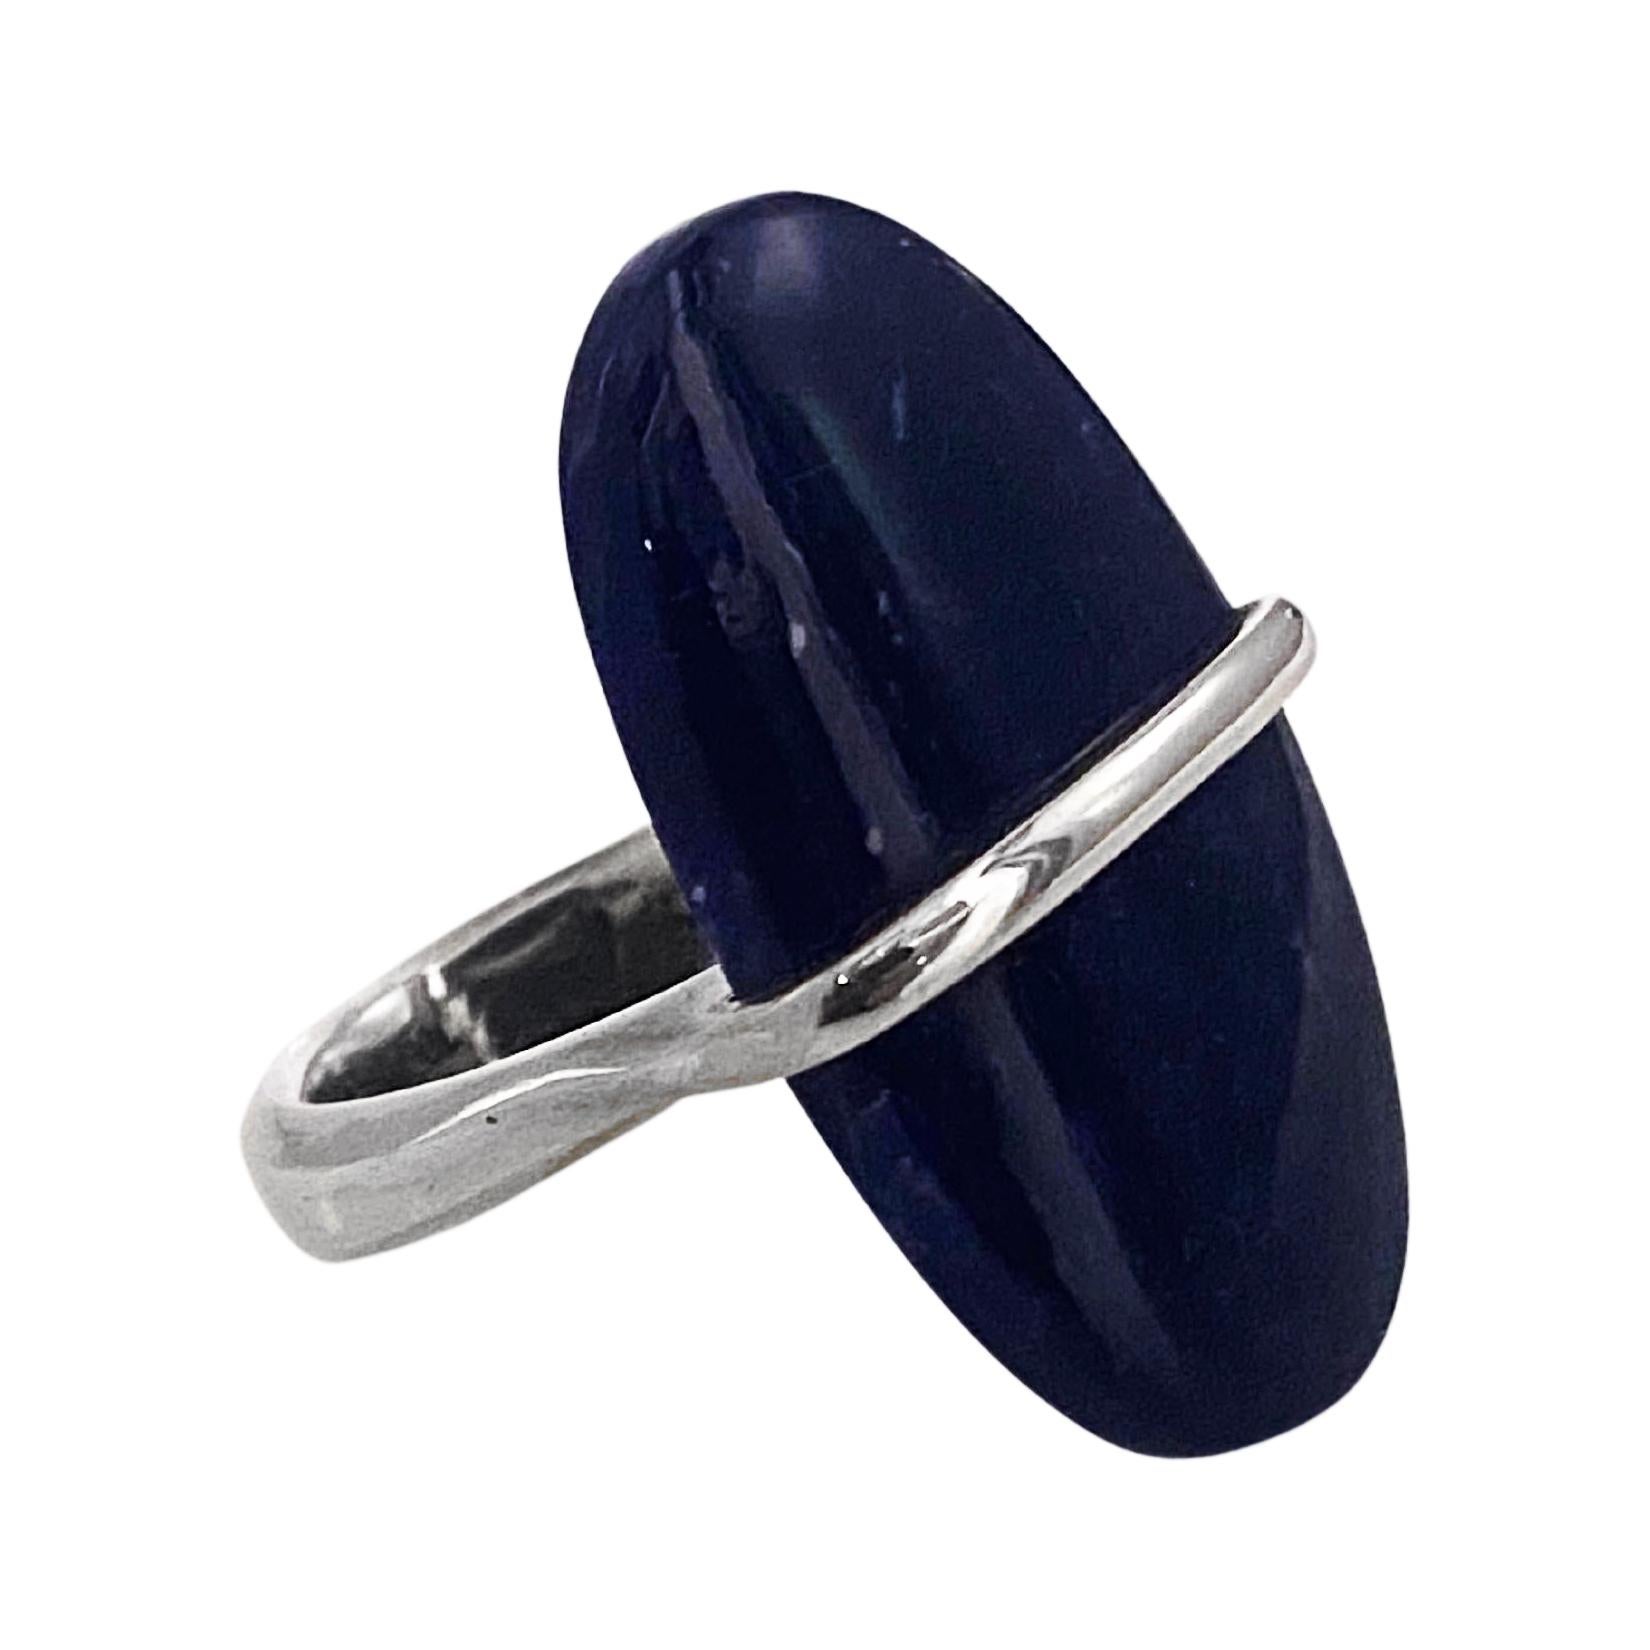 Rare Sterling Silver and Sodalite ring designed by Vivianna Torun Bulow-Hube for Georg Jensen Denmark C.1970. Stamped 925S Georg Jensen in oval dotted punch and Torun design number 190. Ring Size:8. Item Weight: 8.46 grams. Top measures: 30.0 x 17.6